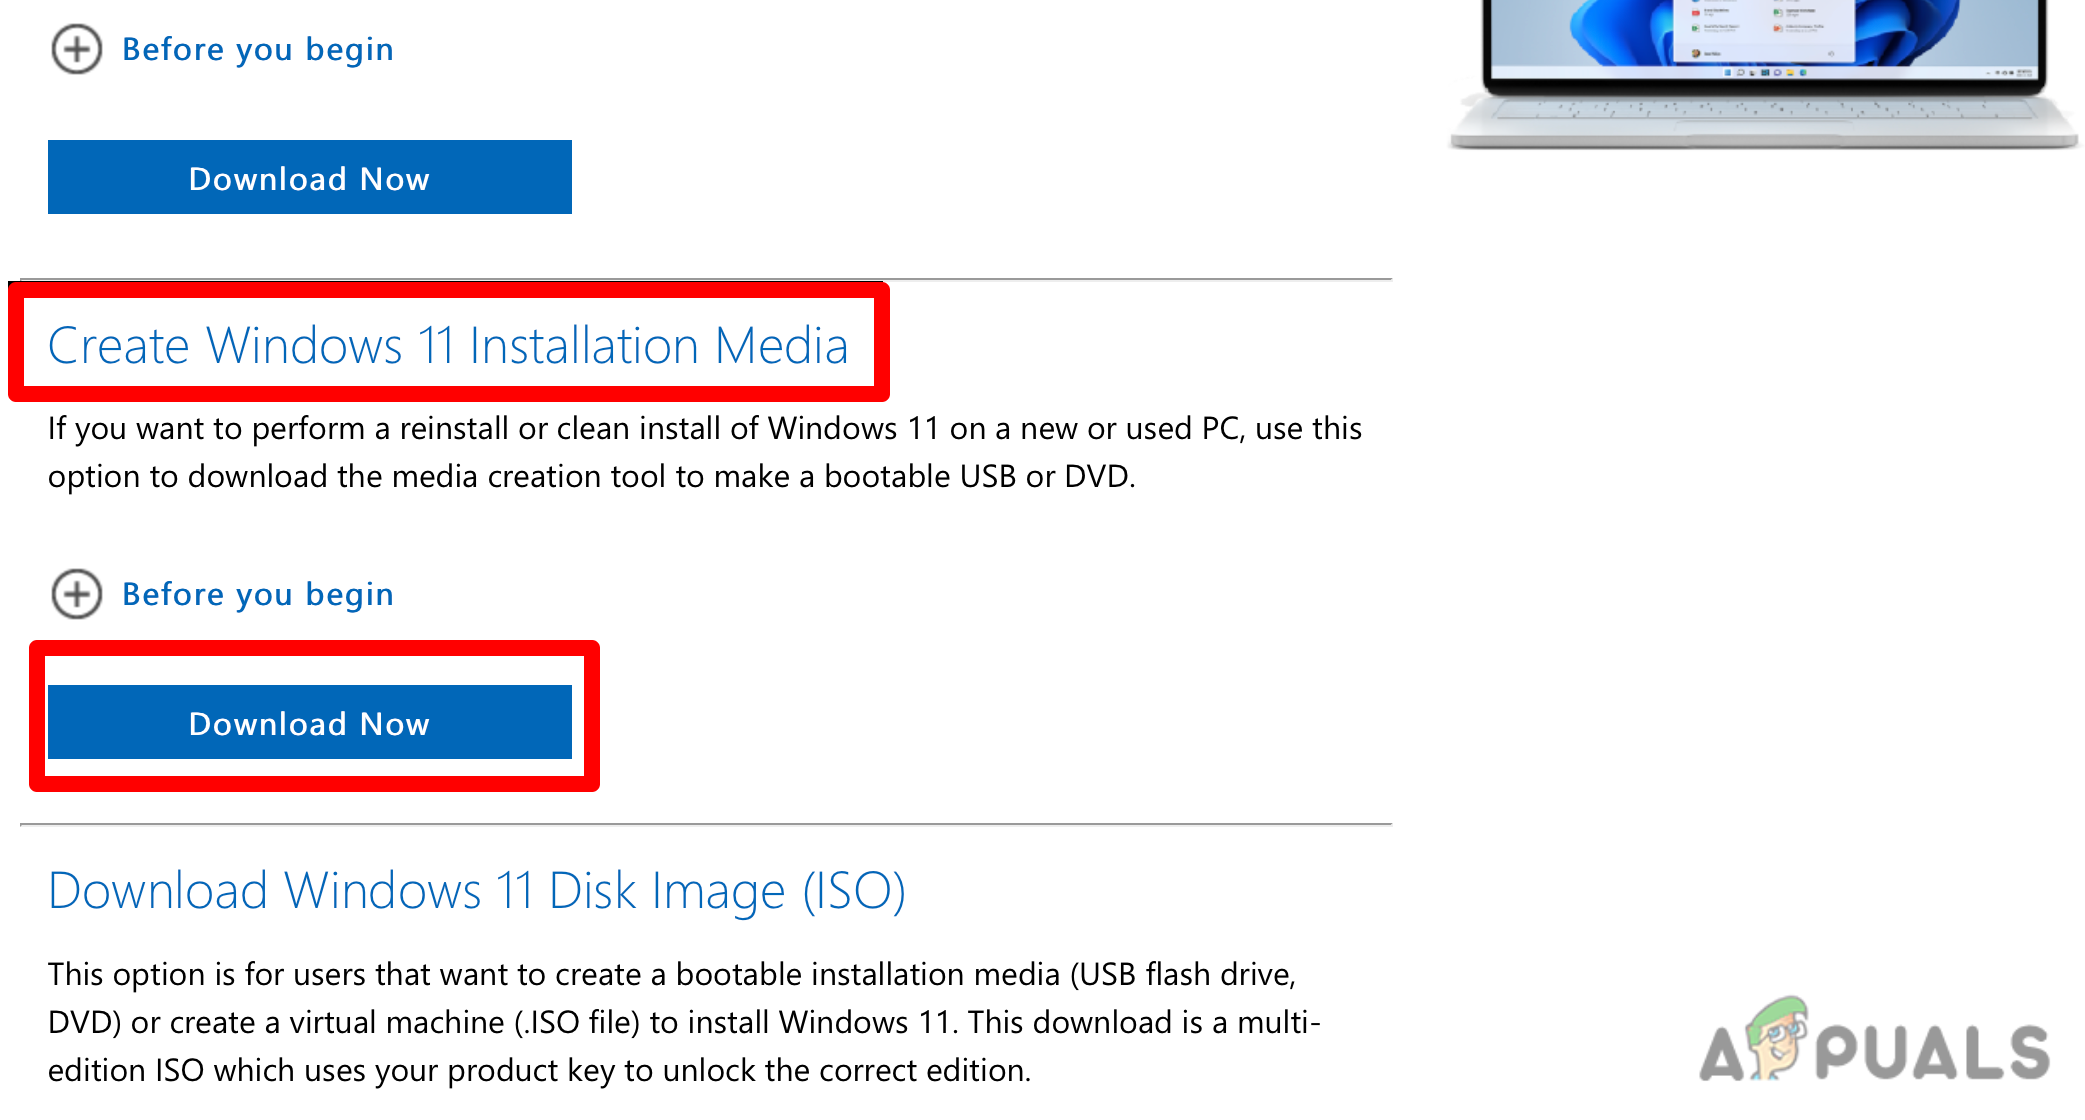 Click the Download now button on the "Create Windows 11 Installation Media